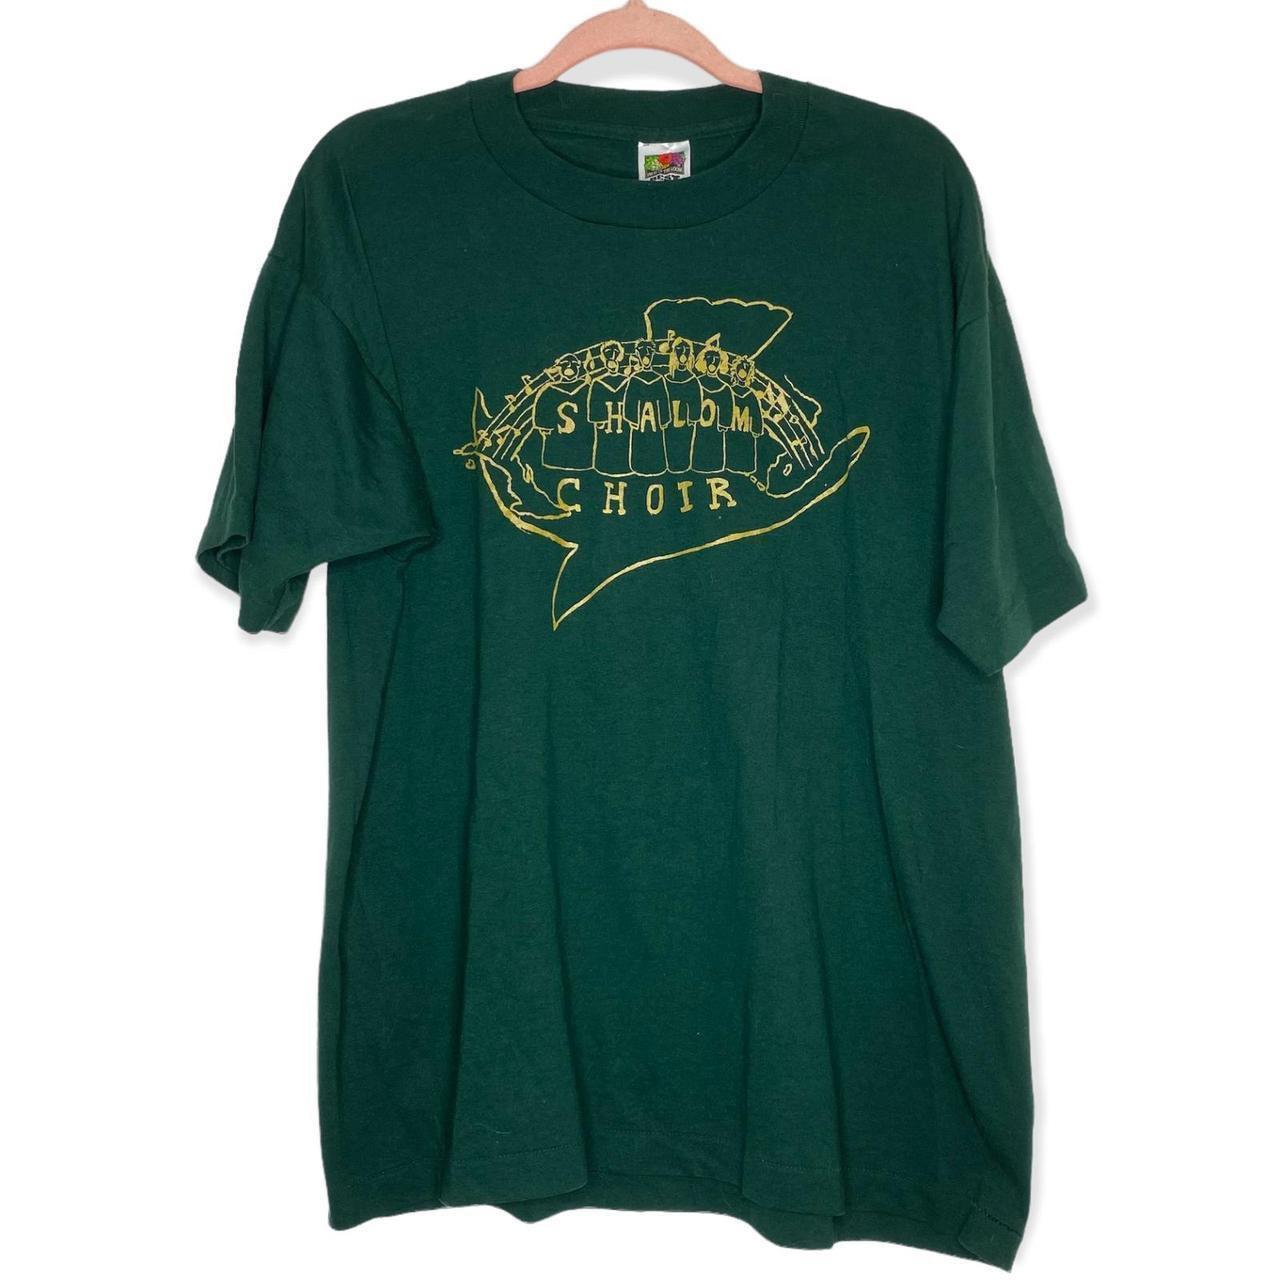 Product Image 1 - Vintage dark green tee featuring